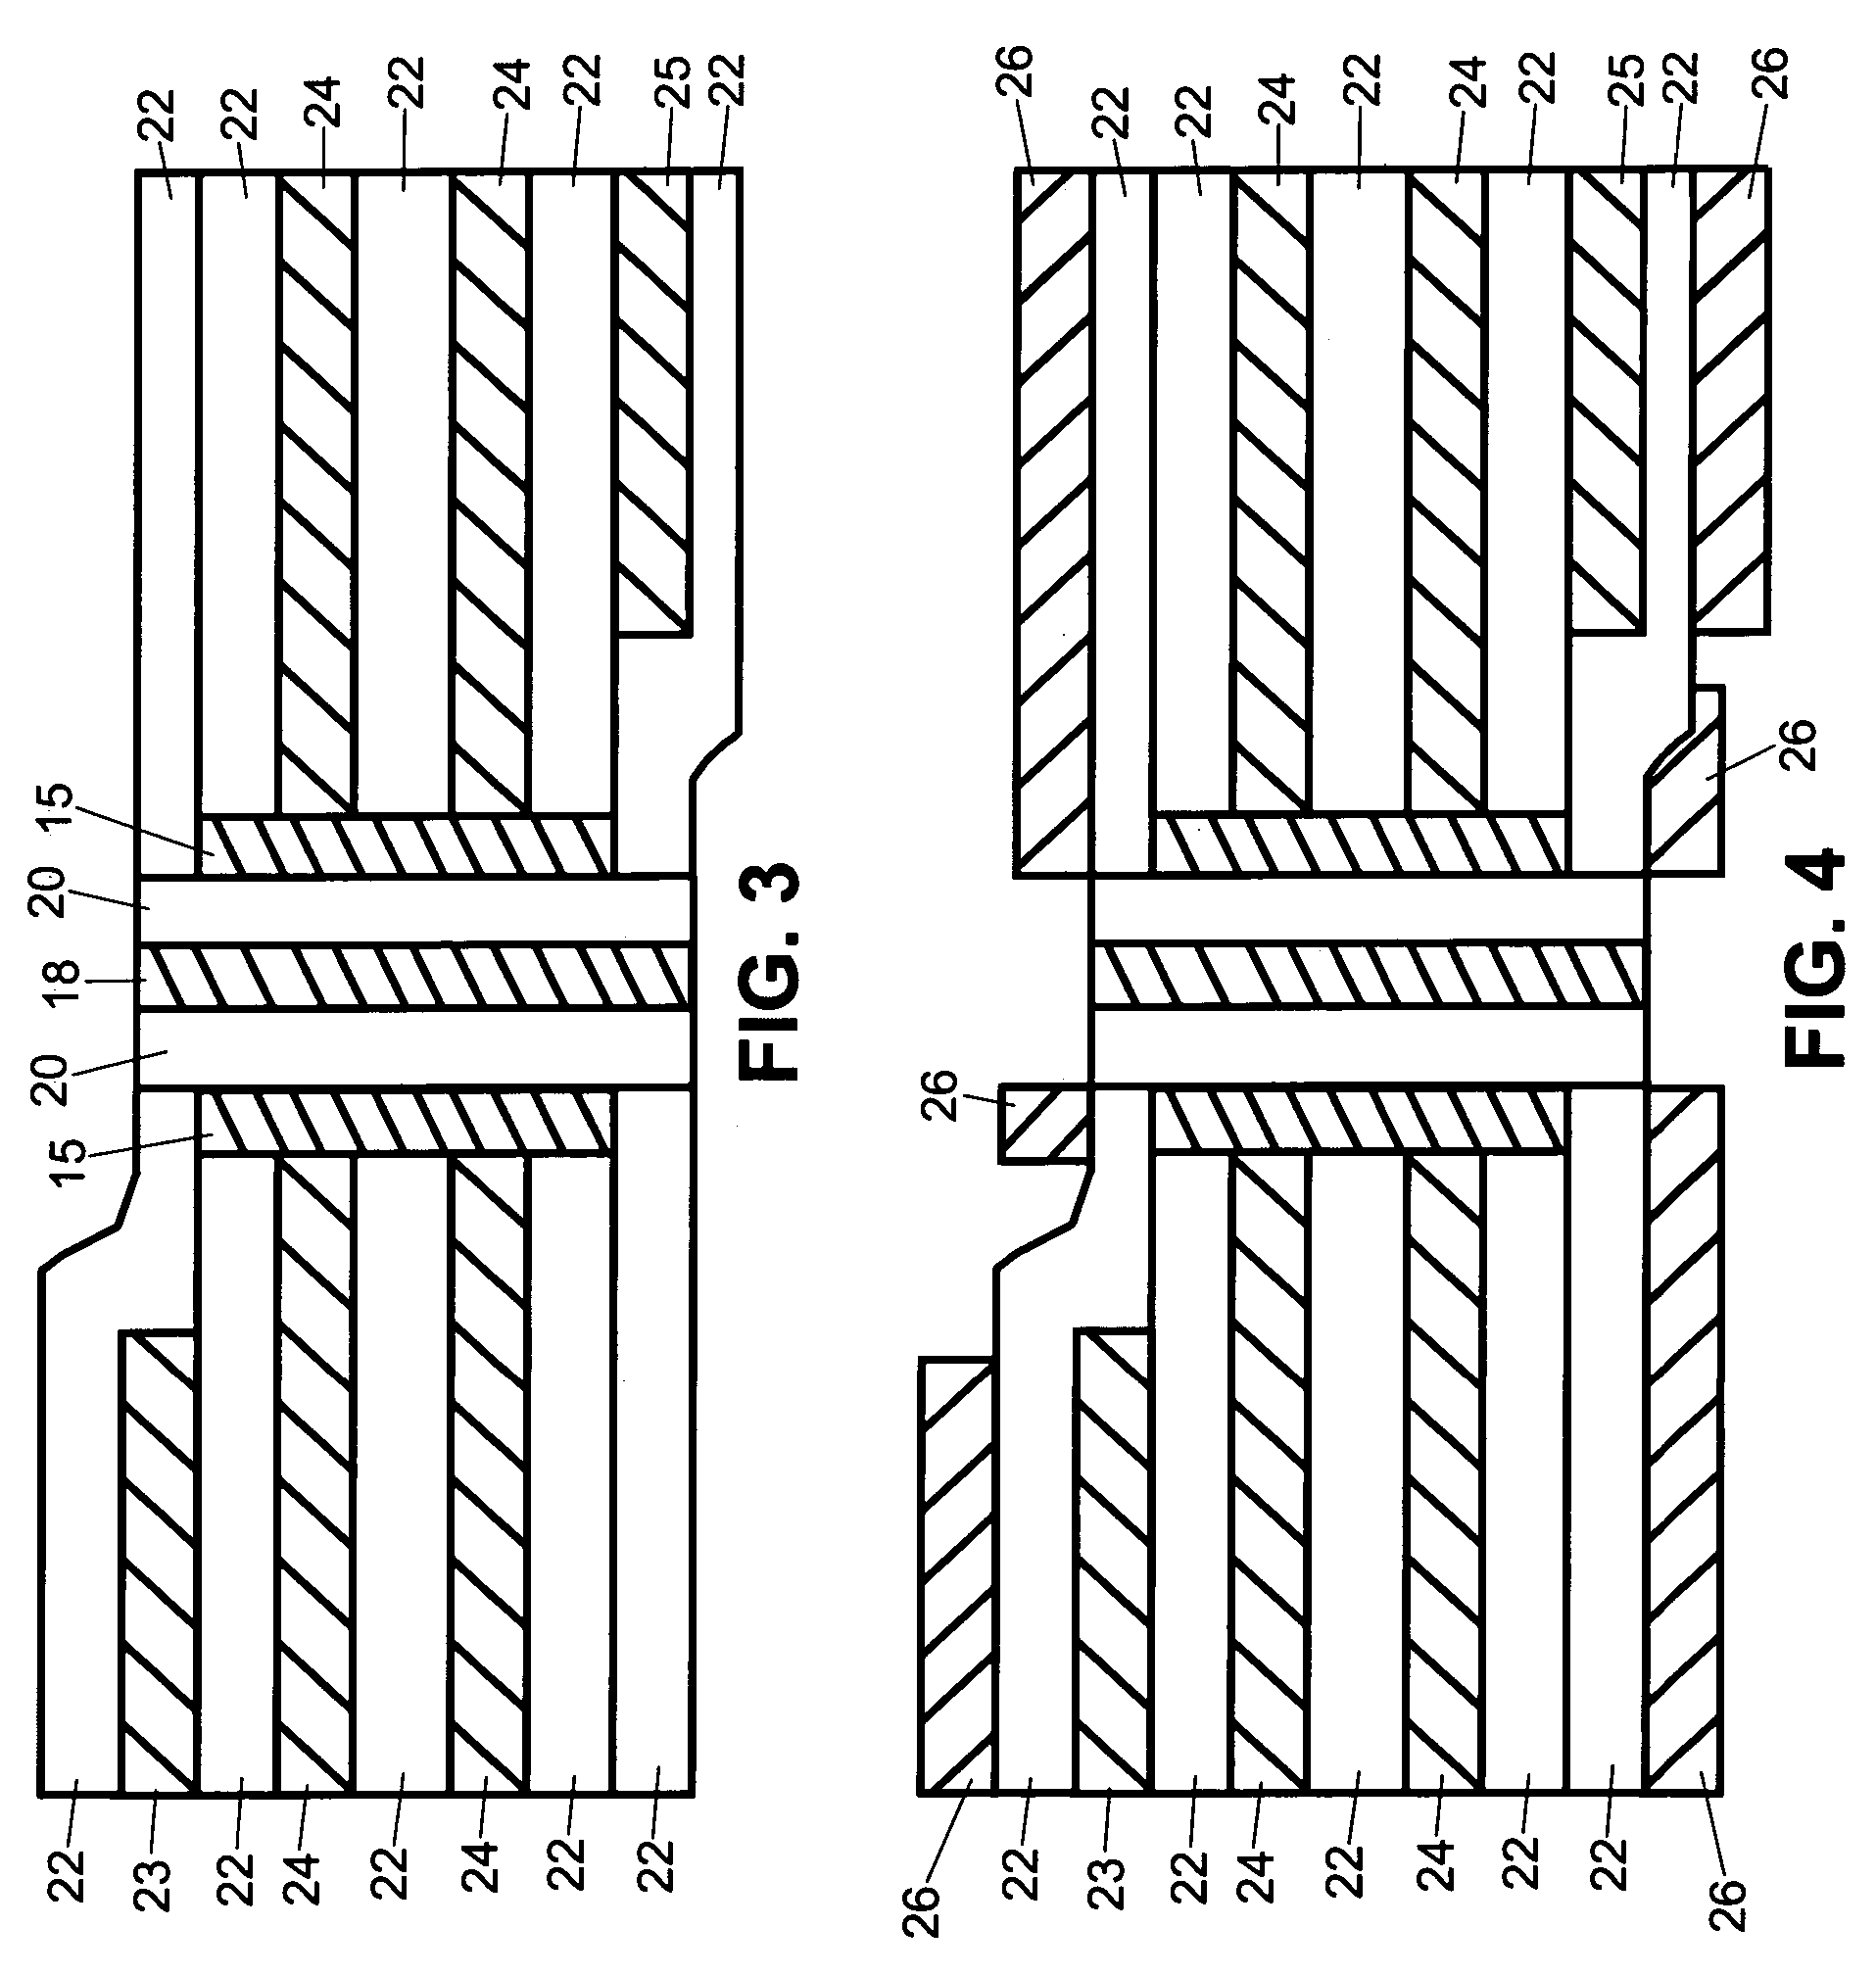 Method for fabricating a printed circuit board having a coaxial via